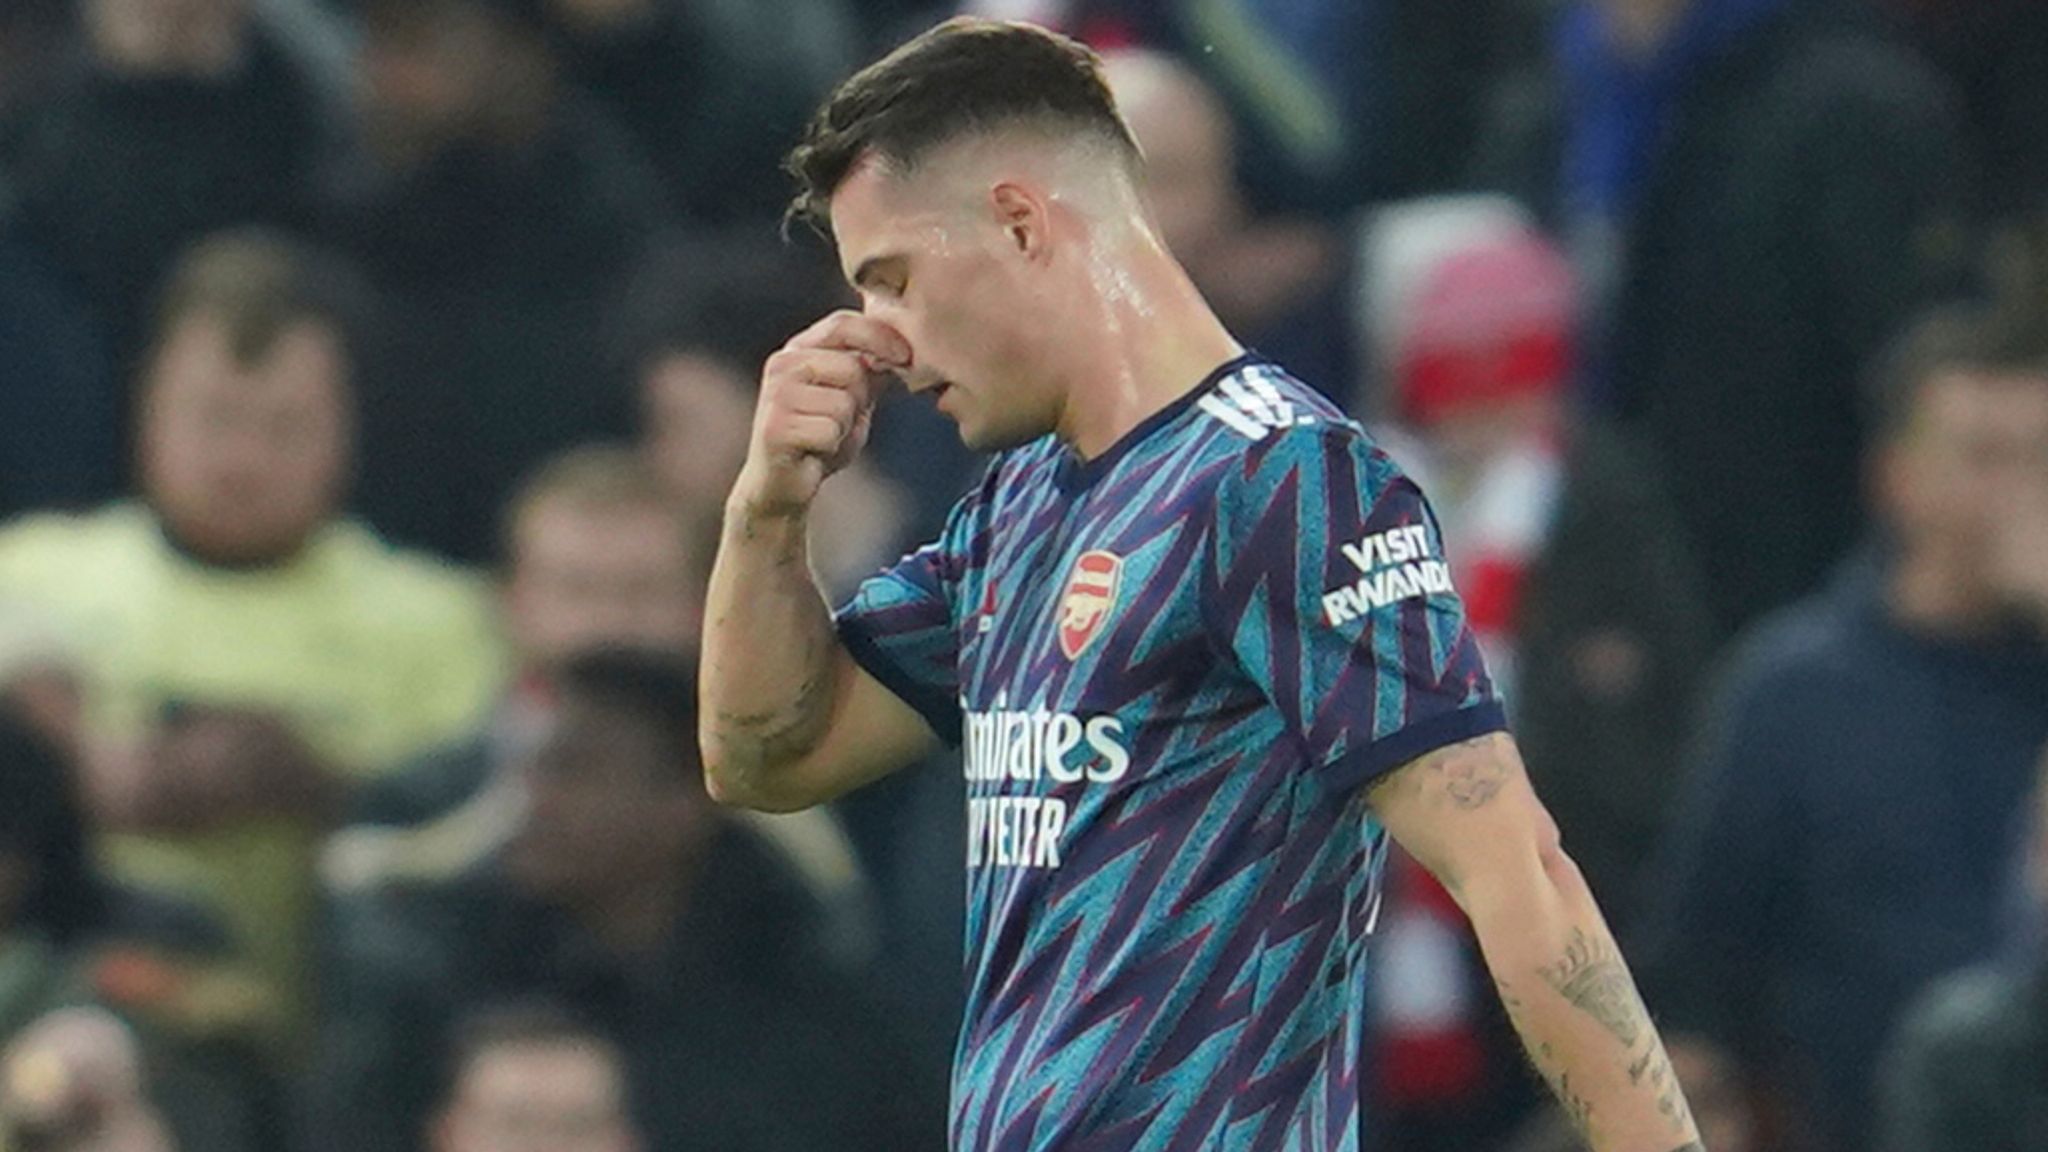 Xhaka makes Arsenal vow as he says sorry to fans for swearing at them